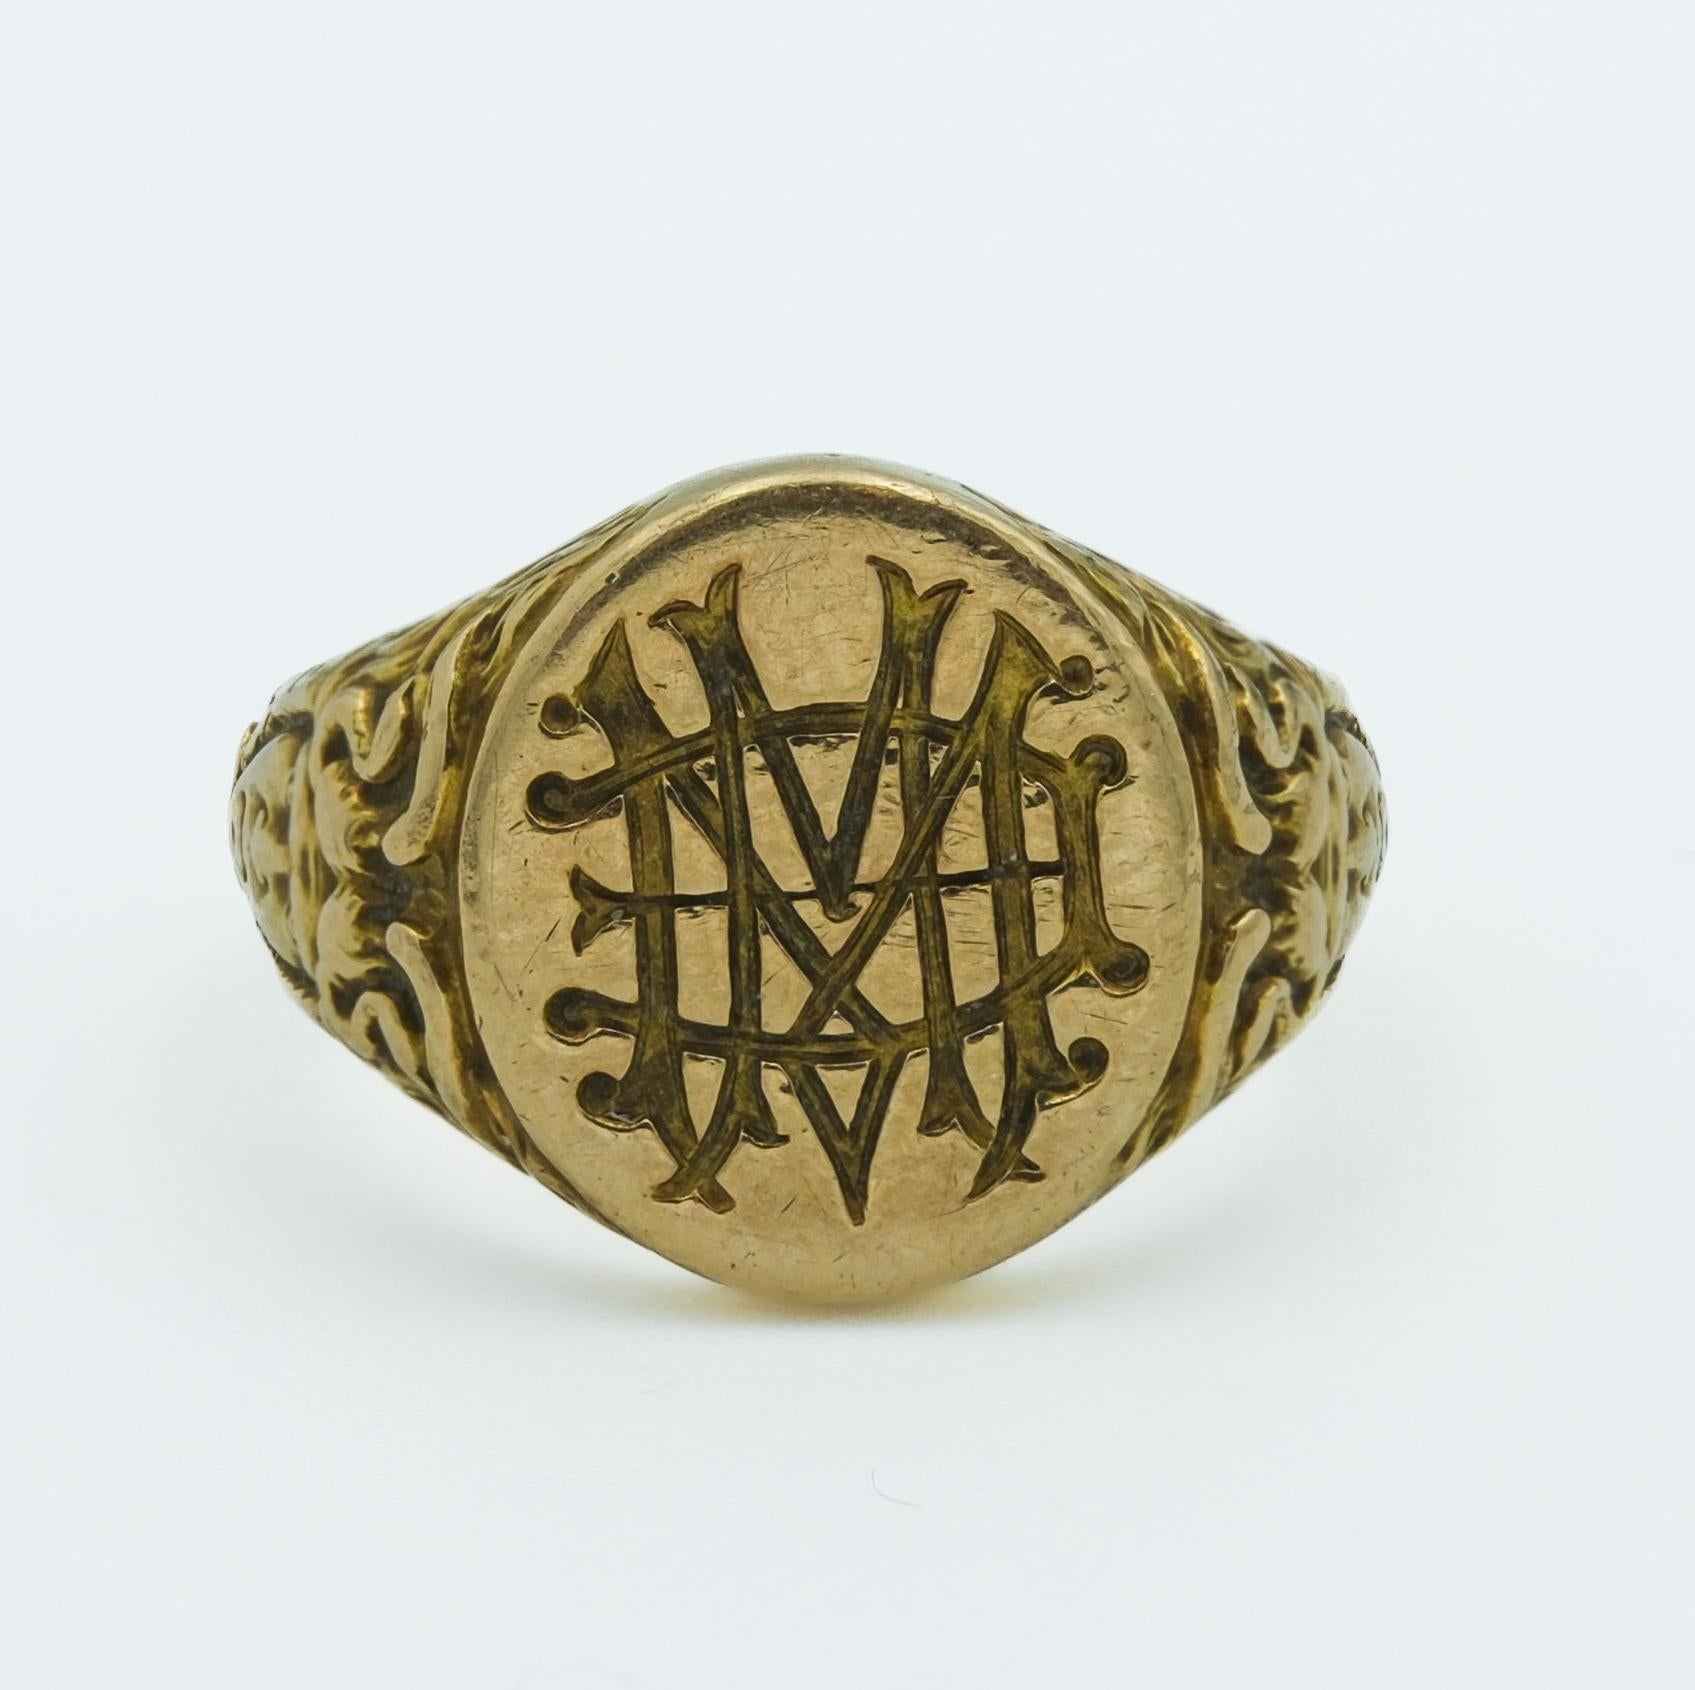 This Art Nouveau era yellow gold ring, dated inside 1900, is a fine example of the period's aesthetic, which often included fluid, organic forms and mythological motifs. The band features a figural depiction of Medusa, a nod to the era's fascination